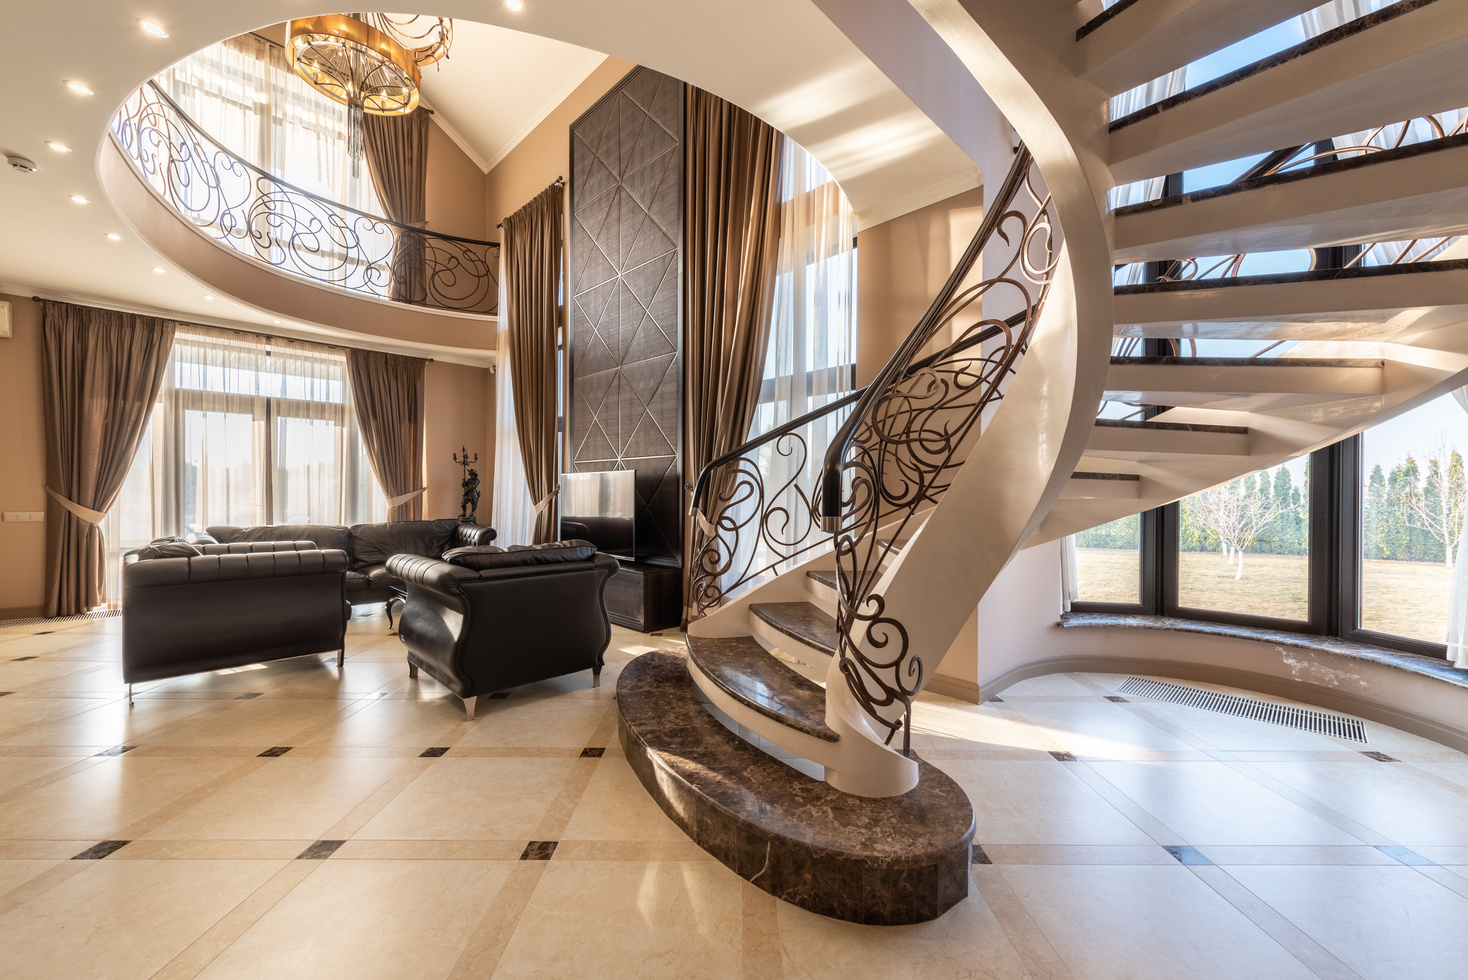 Interior of luxury house with staircase